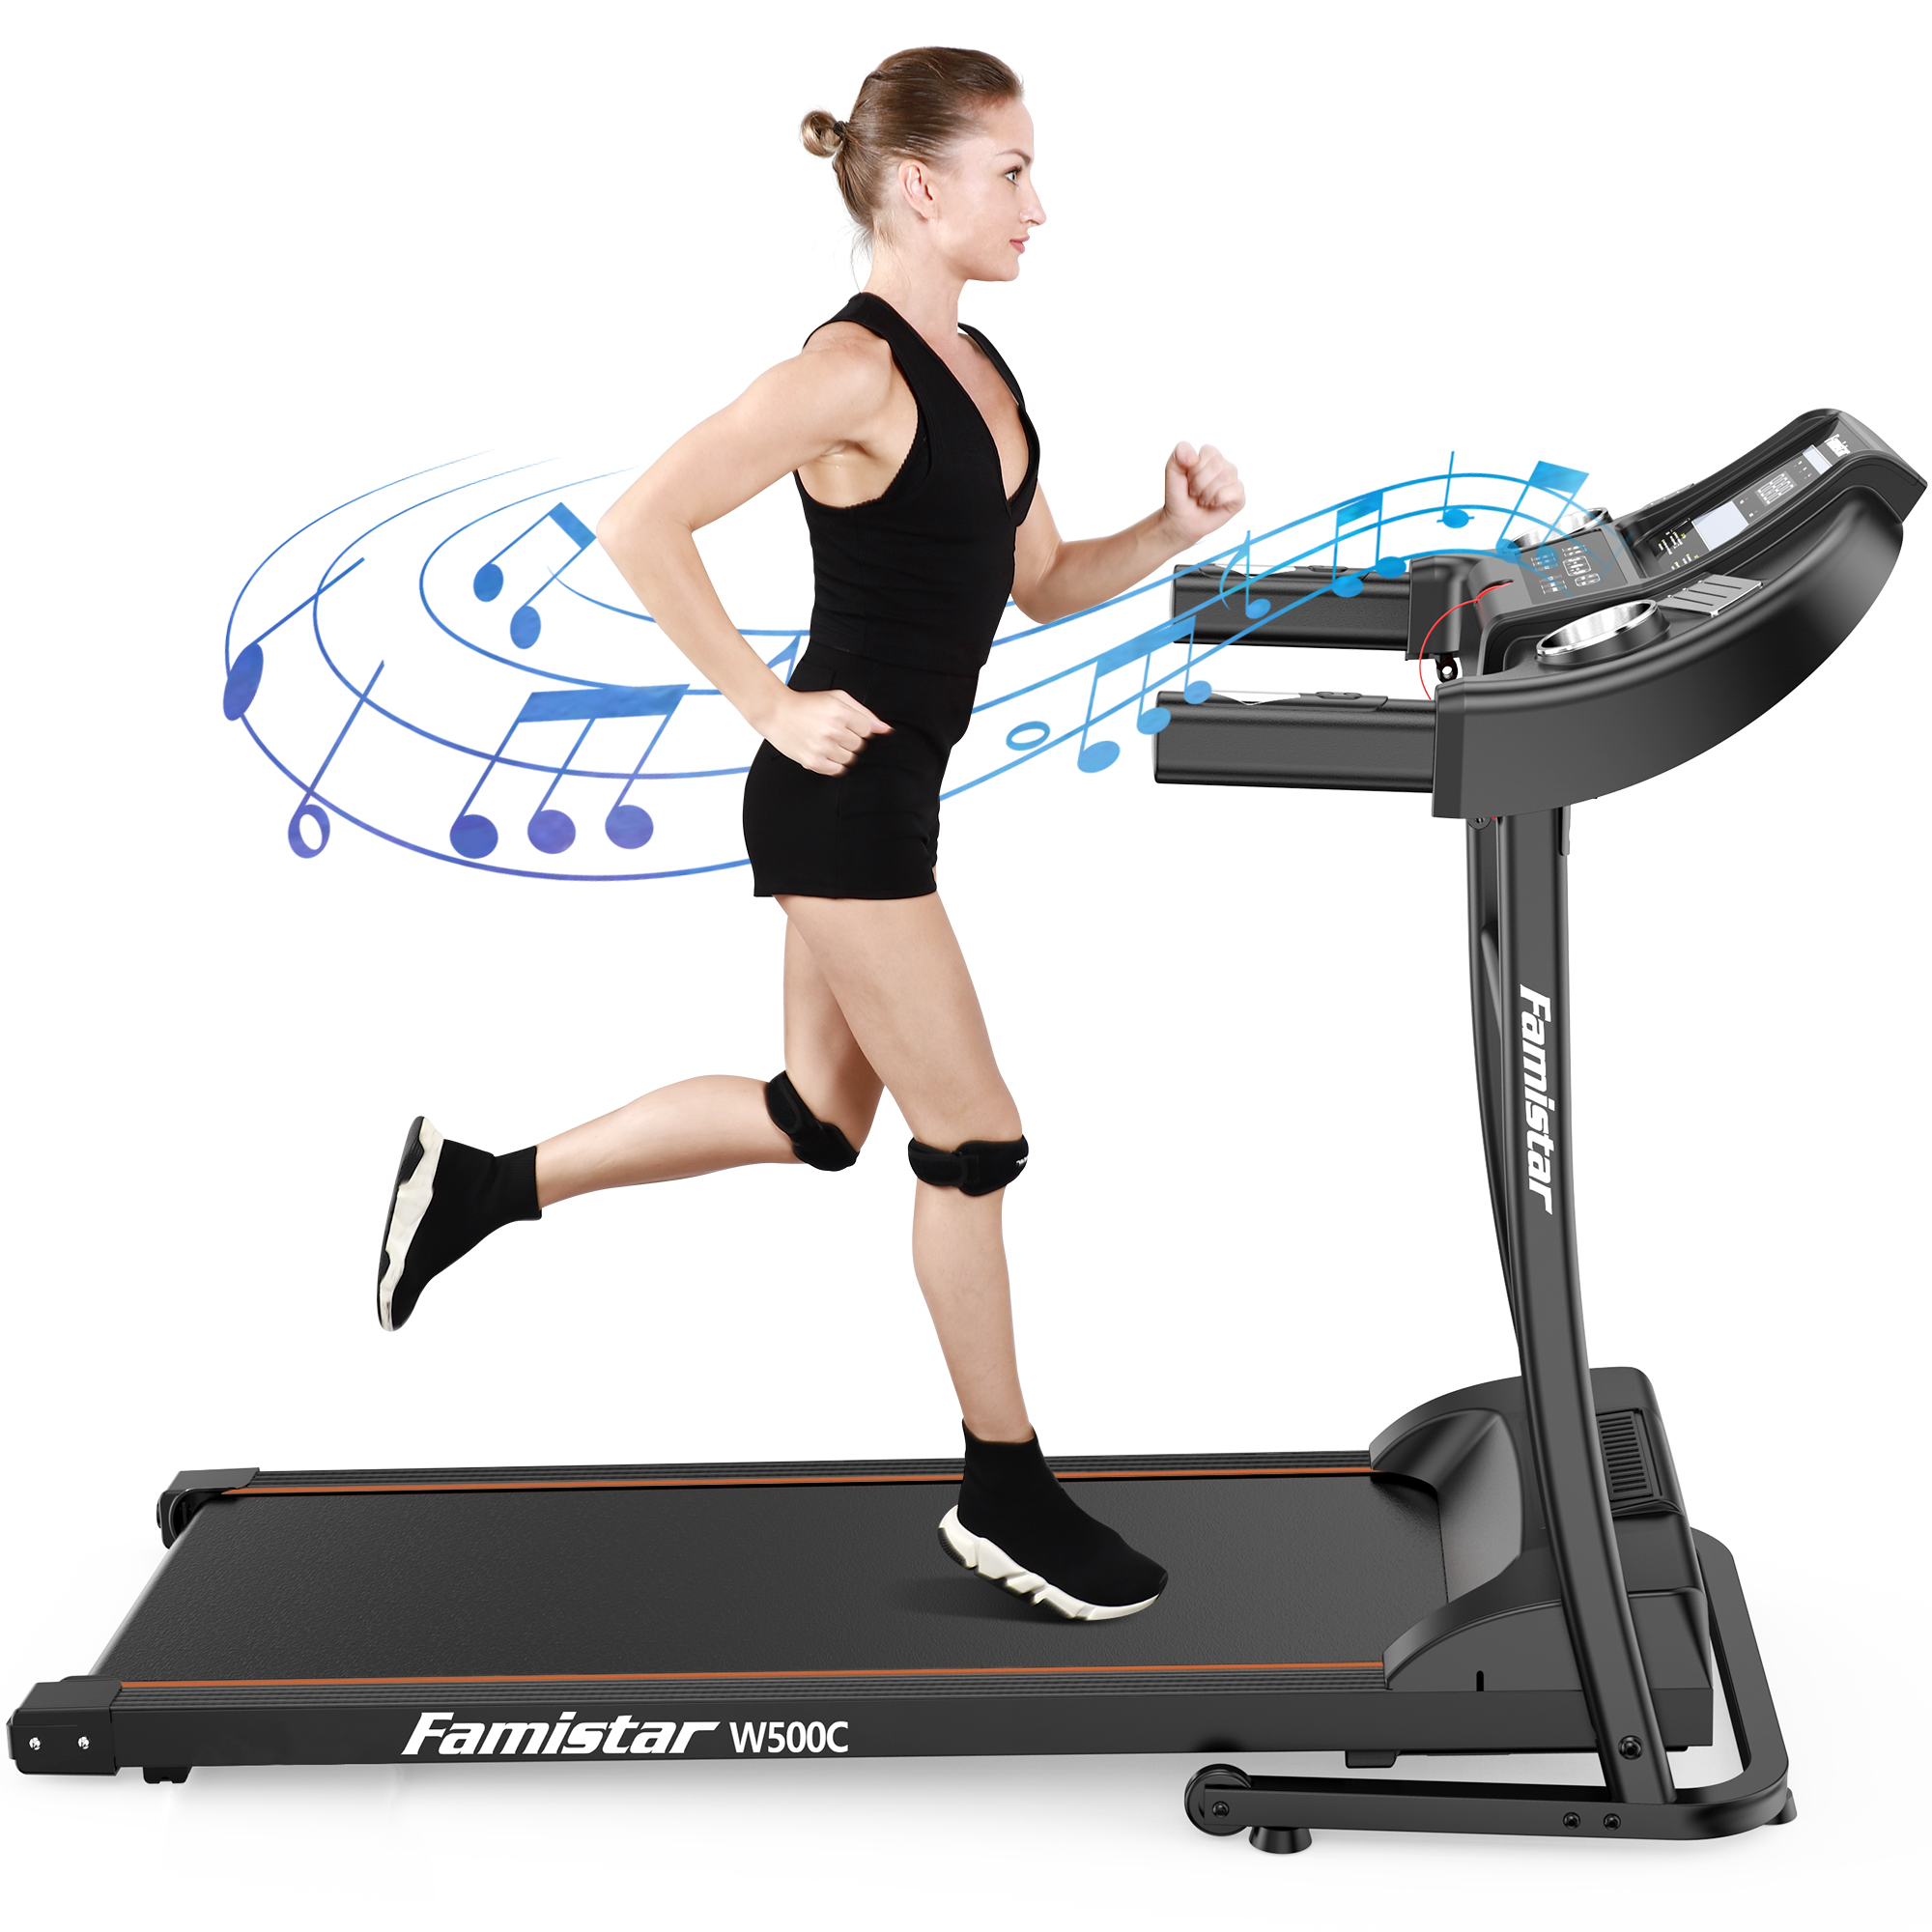 Famistar W500C 1.5HP Folding Electric Treadmill with 3 Level Manual Incline, Max 240LBS - image 1 of 11